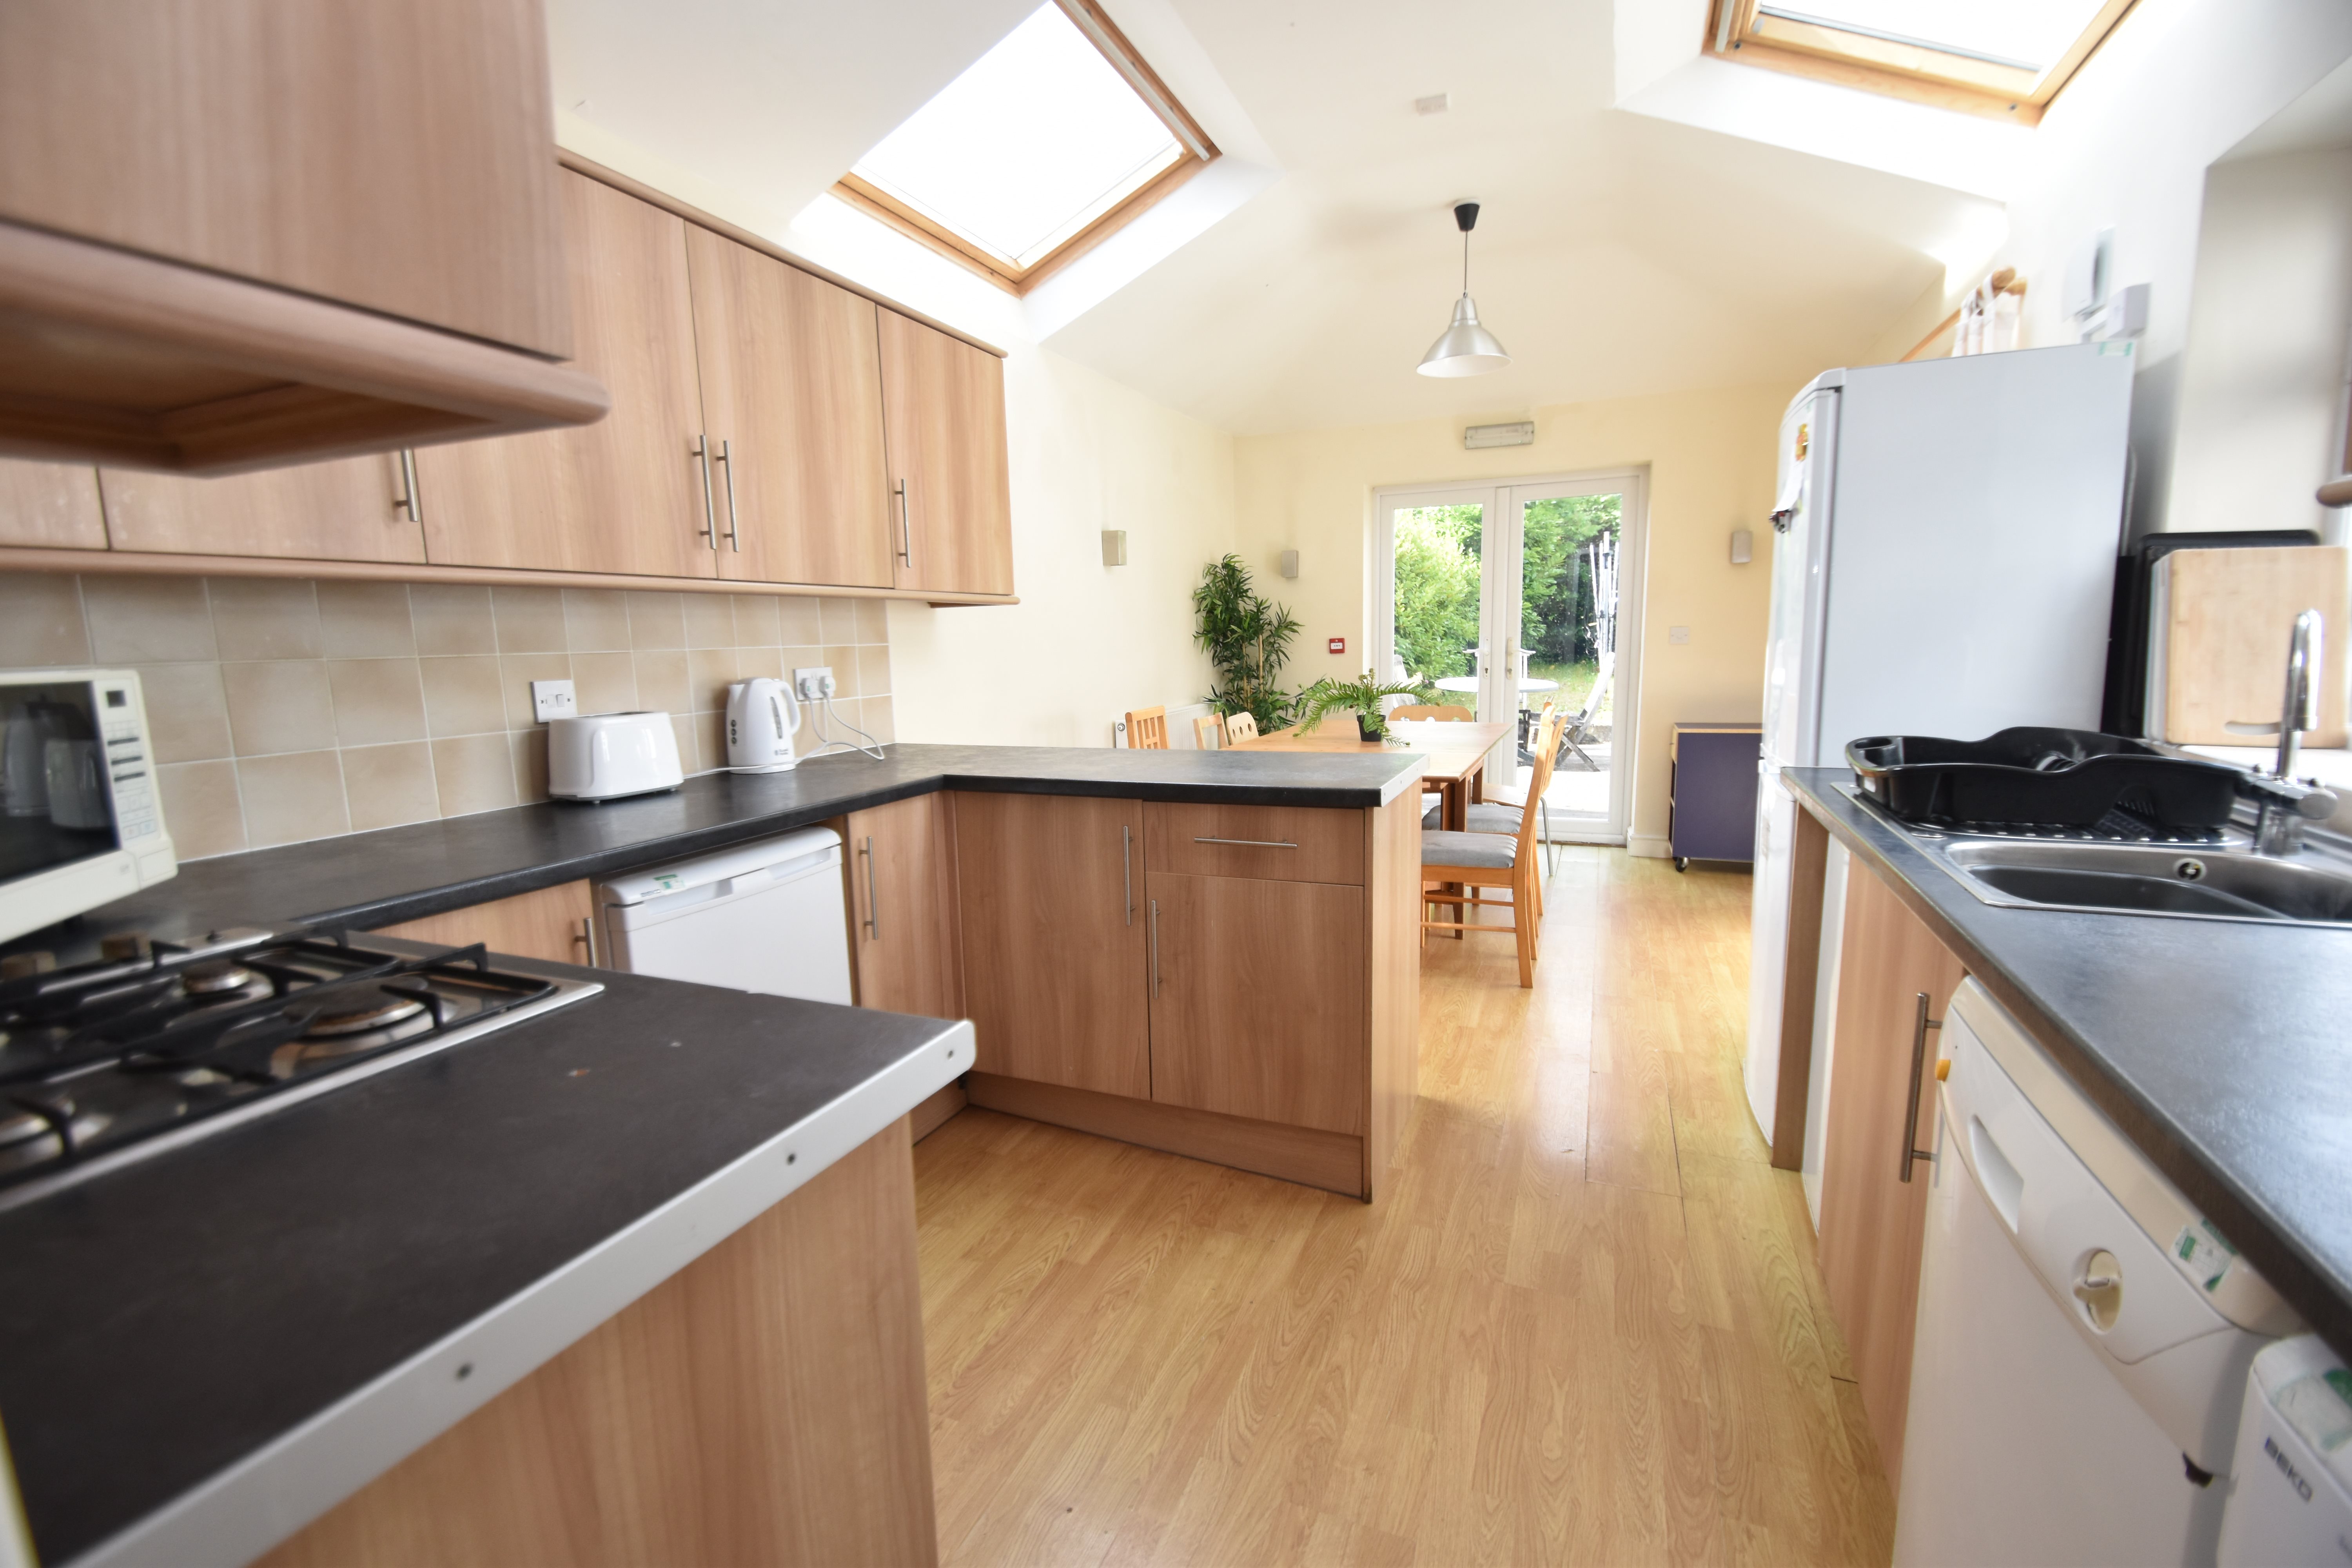 6 bed house to rent in Minny Street, Cathays - Property Image 1